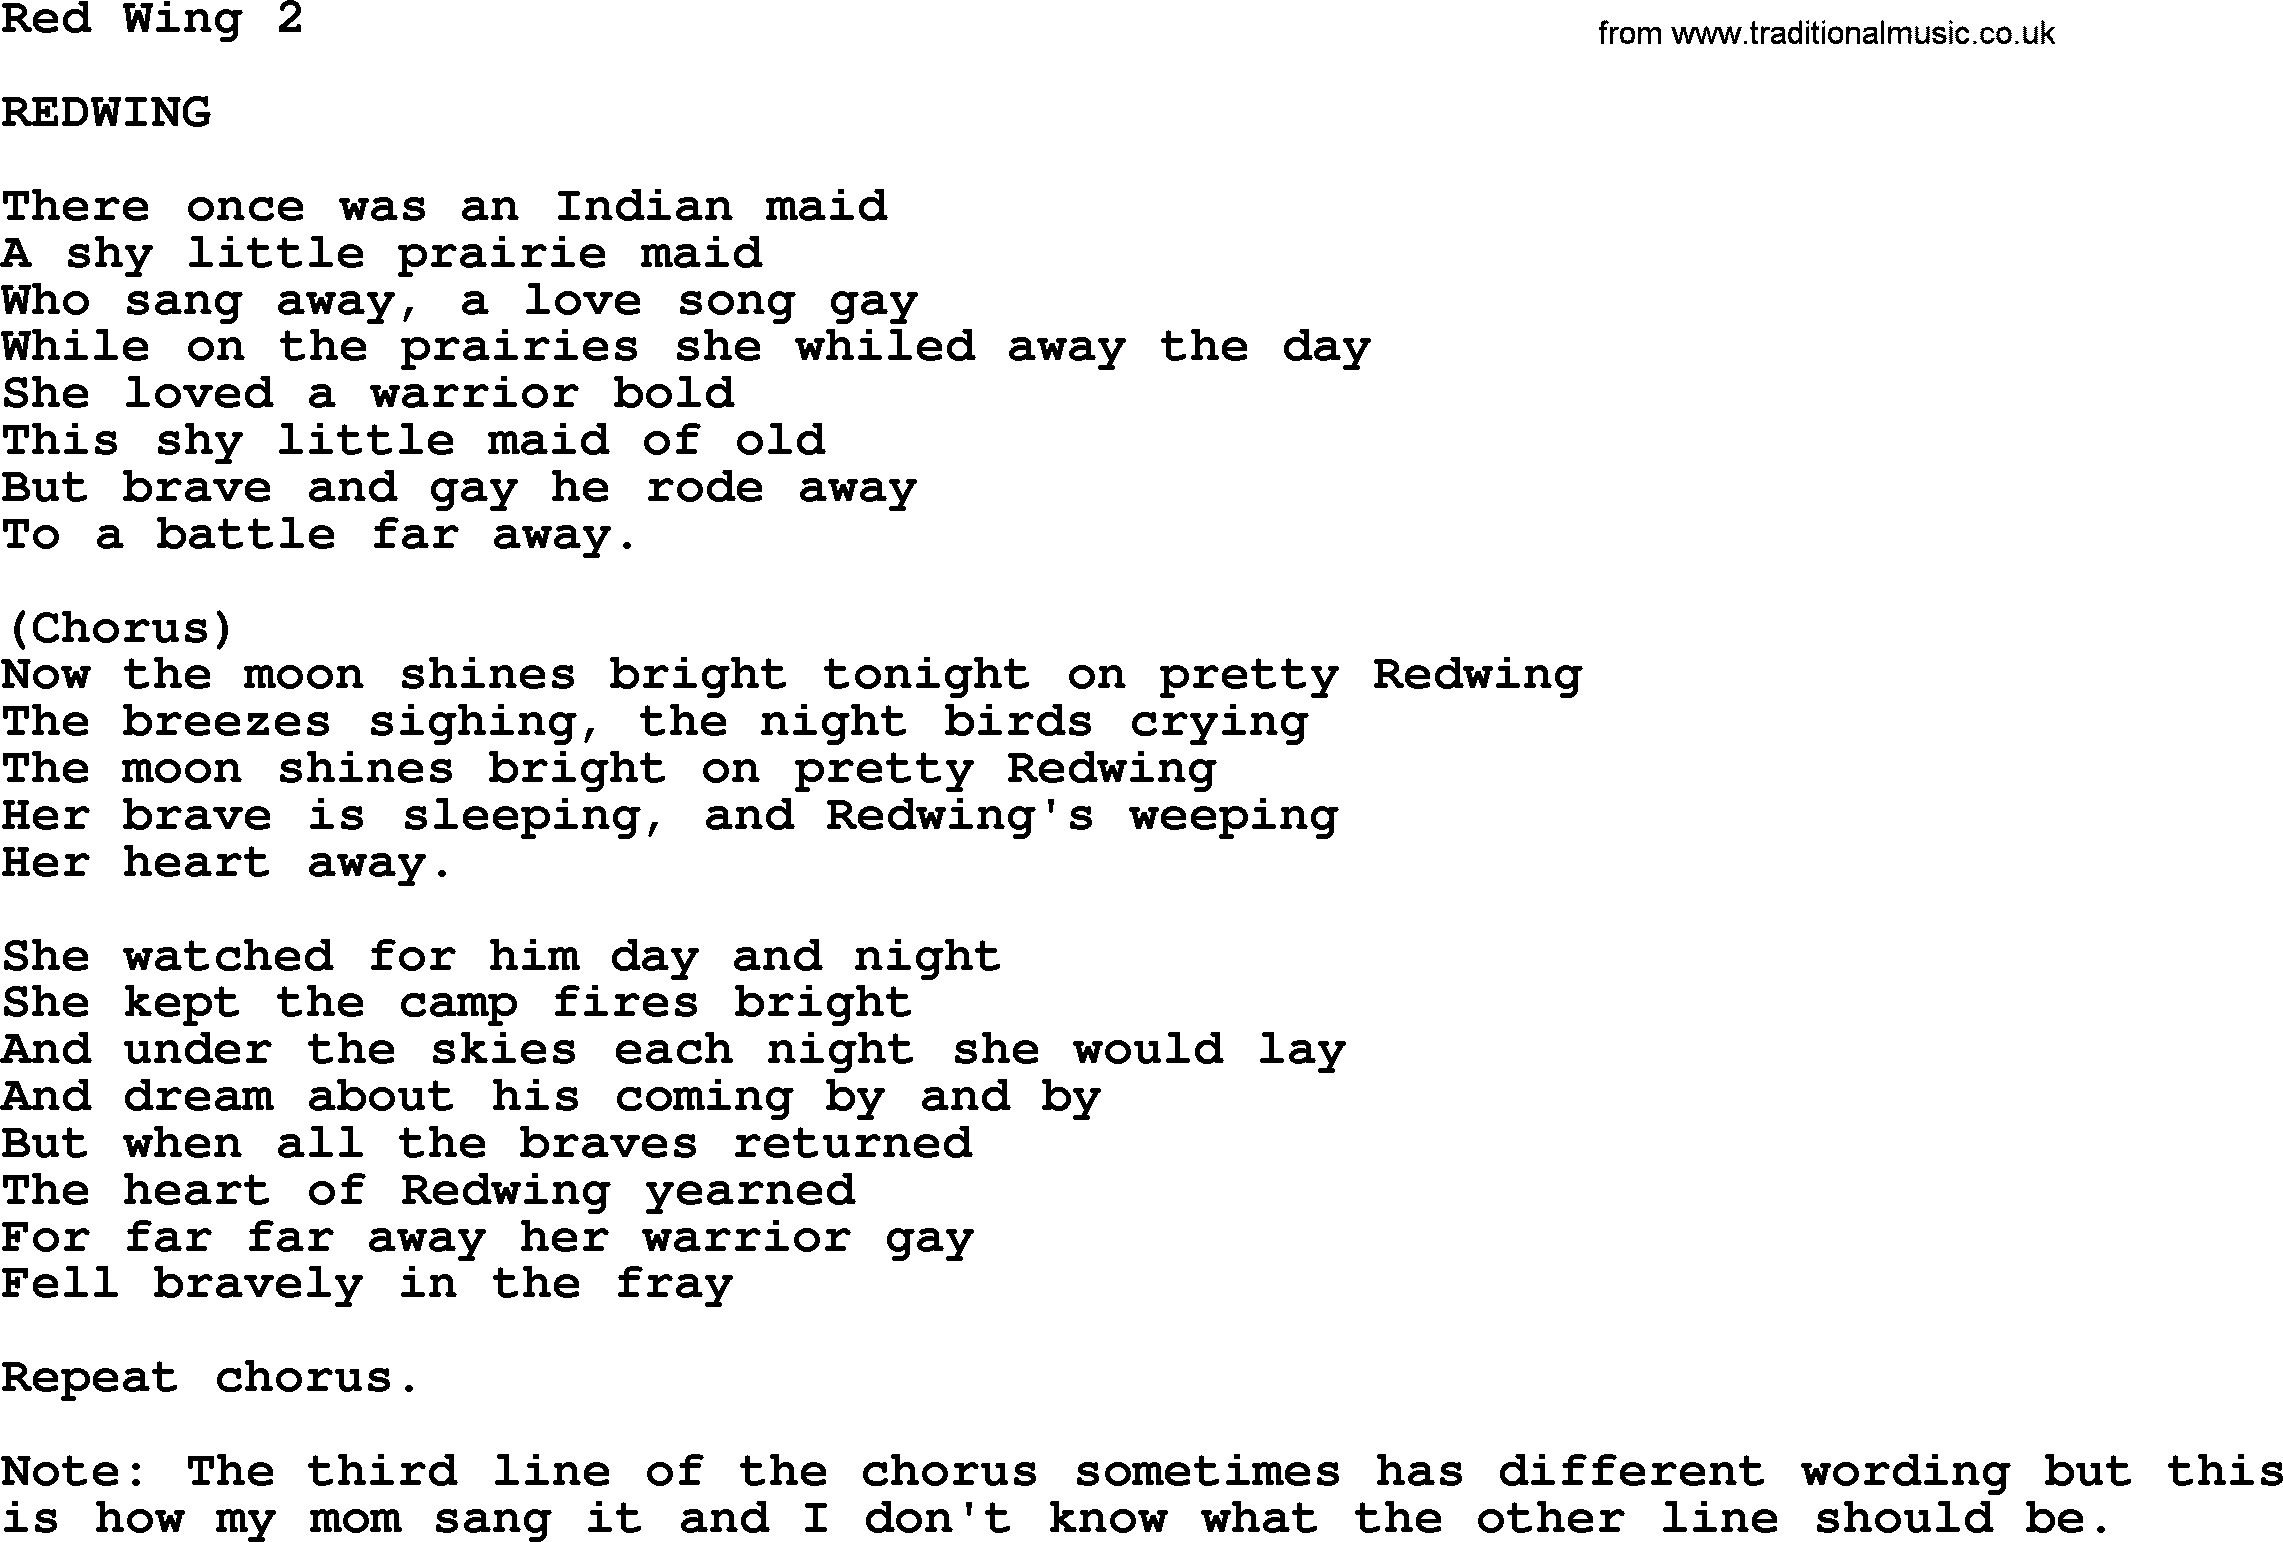 Bluegrass song: Red Wing 2, lyrics and chords